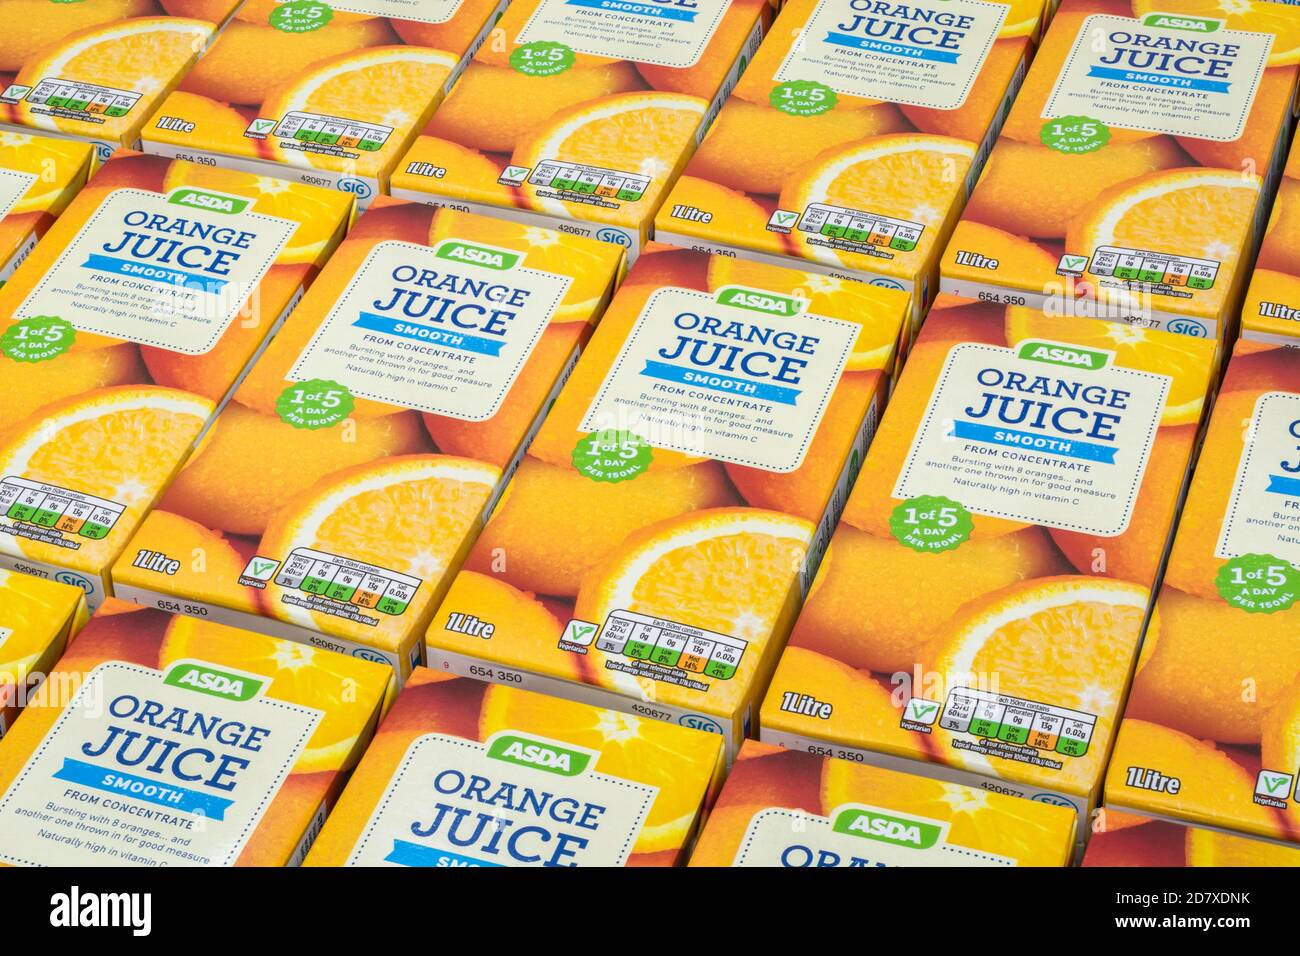 https://c8.alamy.com/comp/2D7XDNK/asda-orange-juice-cartons-labelling-showing-sugar-carbohydrate-content-for-own-label-food-packaging-food-labels-vitamin-c-intake-1-of-5-sig-2D7XDNK.jpg